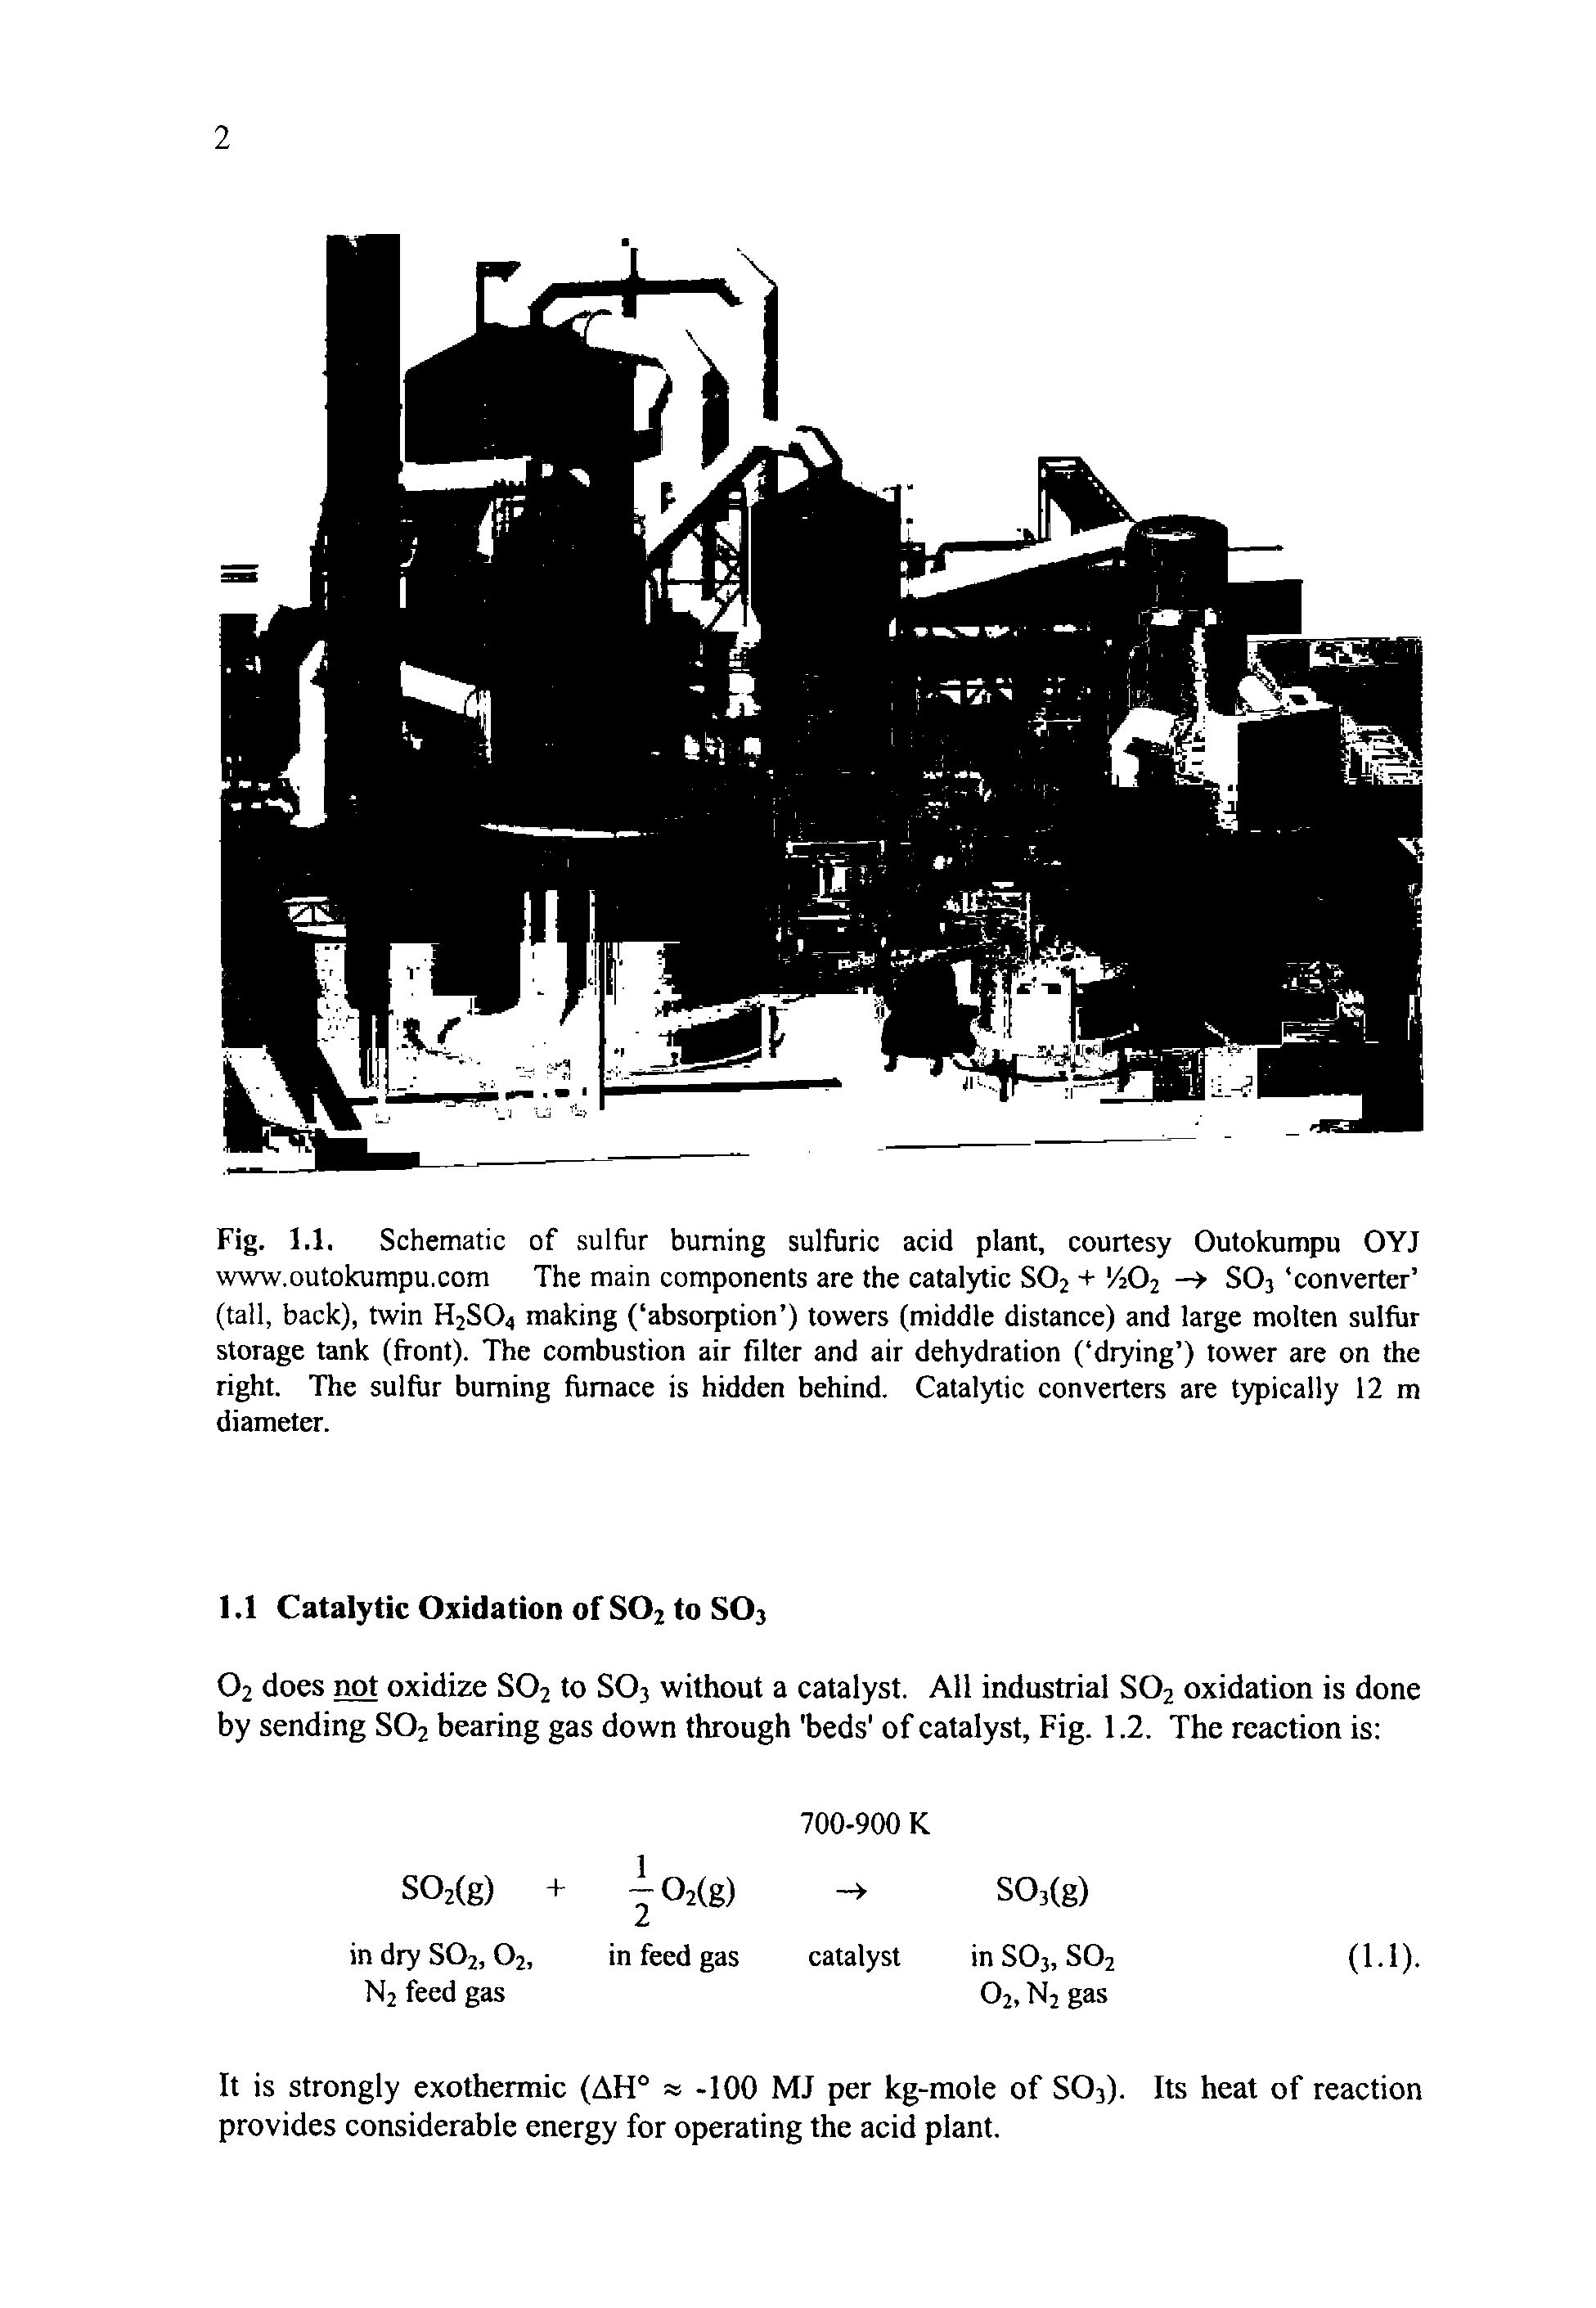 Fig. 1.1. Schematic of sulfur burning sulfuric acid plant, courtesy Outokumpu OYJ www.outokumpu.com The main components are the catalytic S02 + A02 — S03 converter (tall, back), twin H2S04 making ( absorption ) towers (middle distance) and large molten sulfur storage tank (front). The combustion air filter and air dehydration ( drying ) tower are on the right. The sulfur burning furnace is hidden behind. Catalytic converters are typically 12 m diameter.